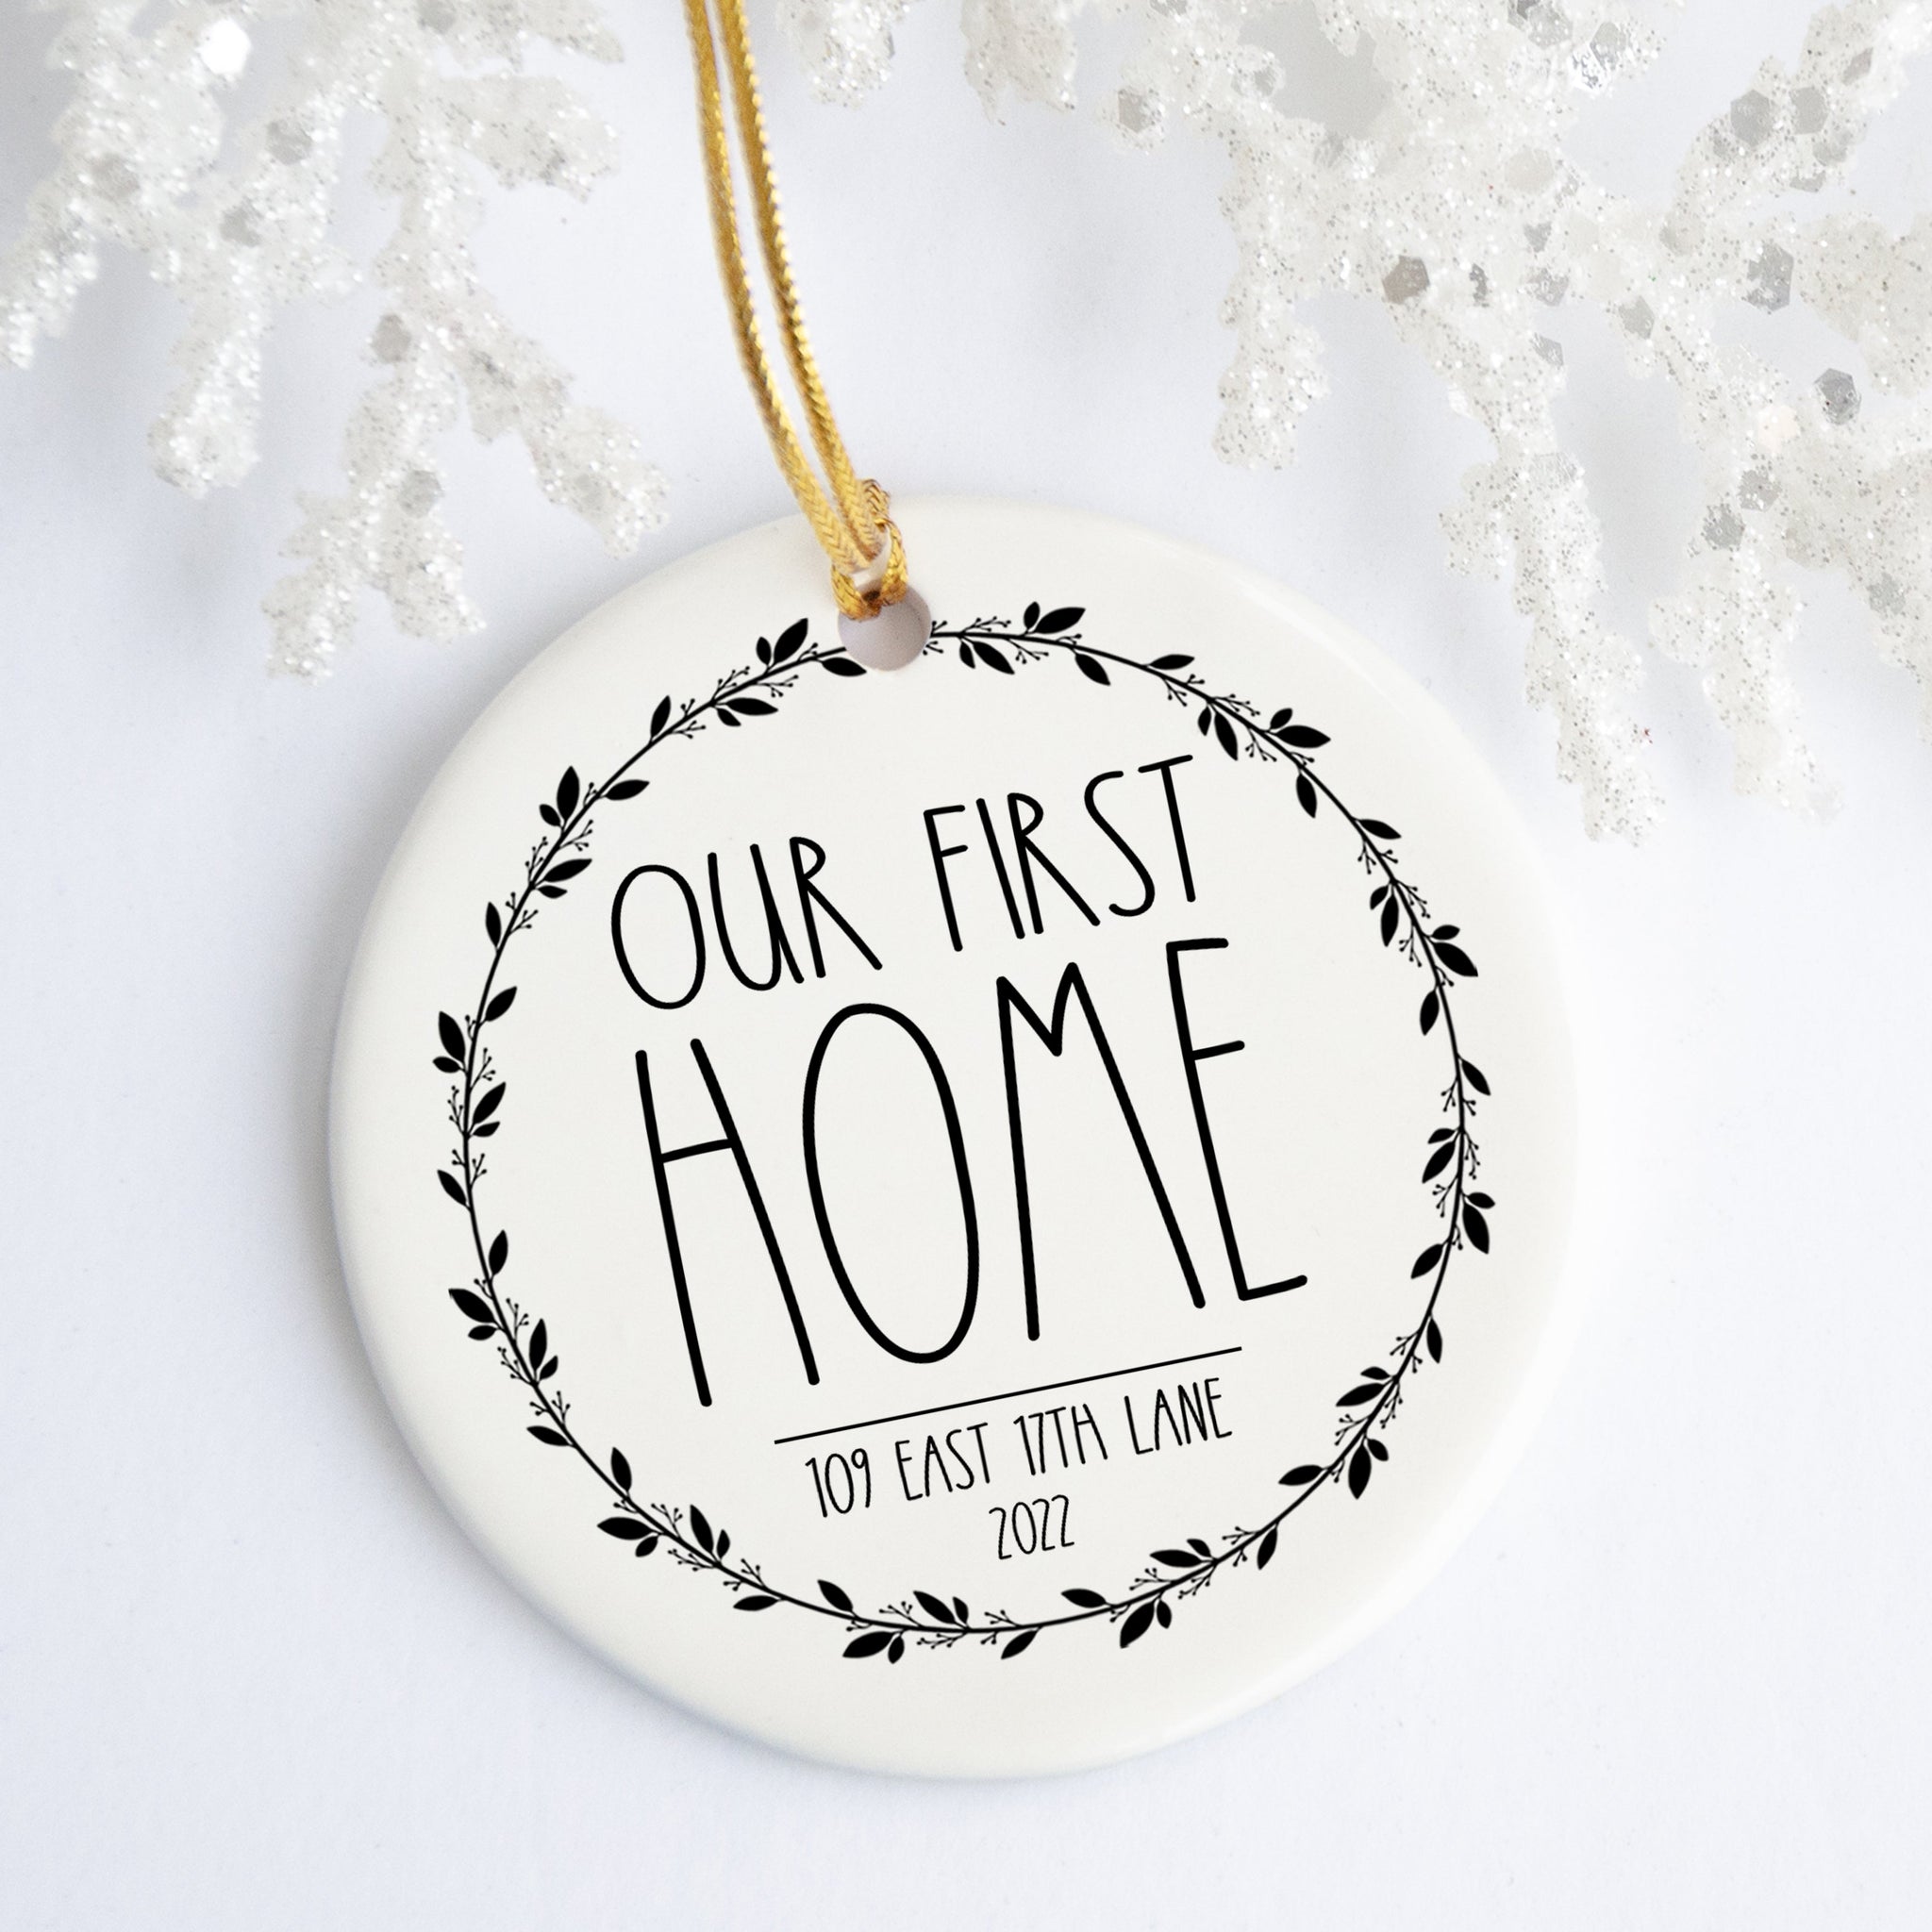 New Home Gift | Our First Home Ornament | Ollie + Hank